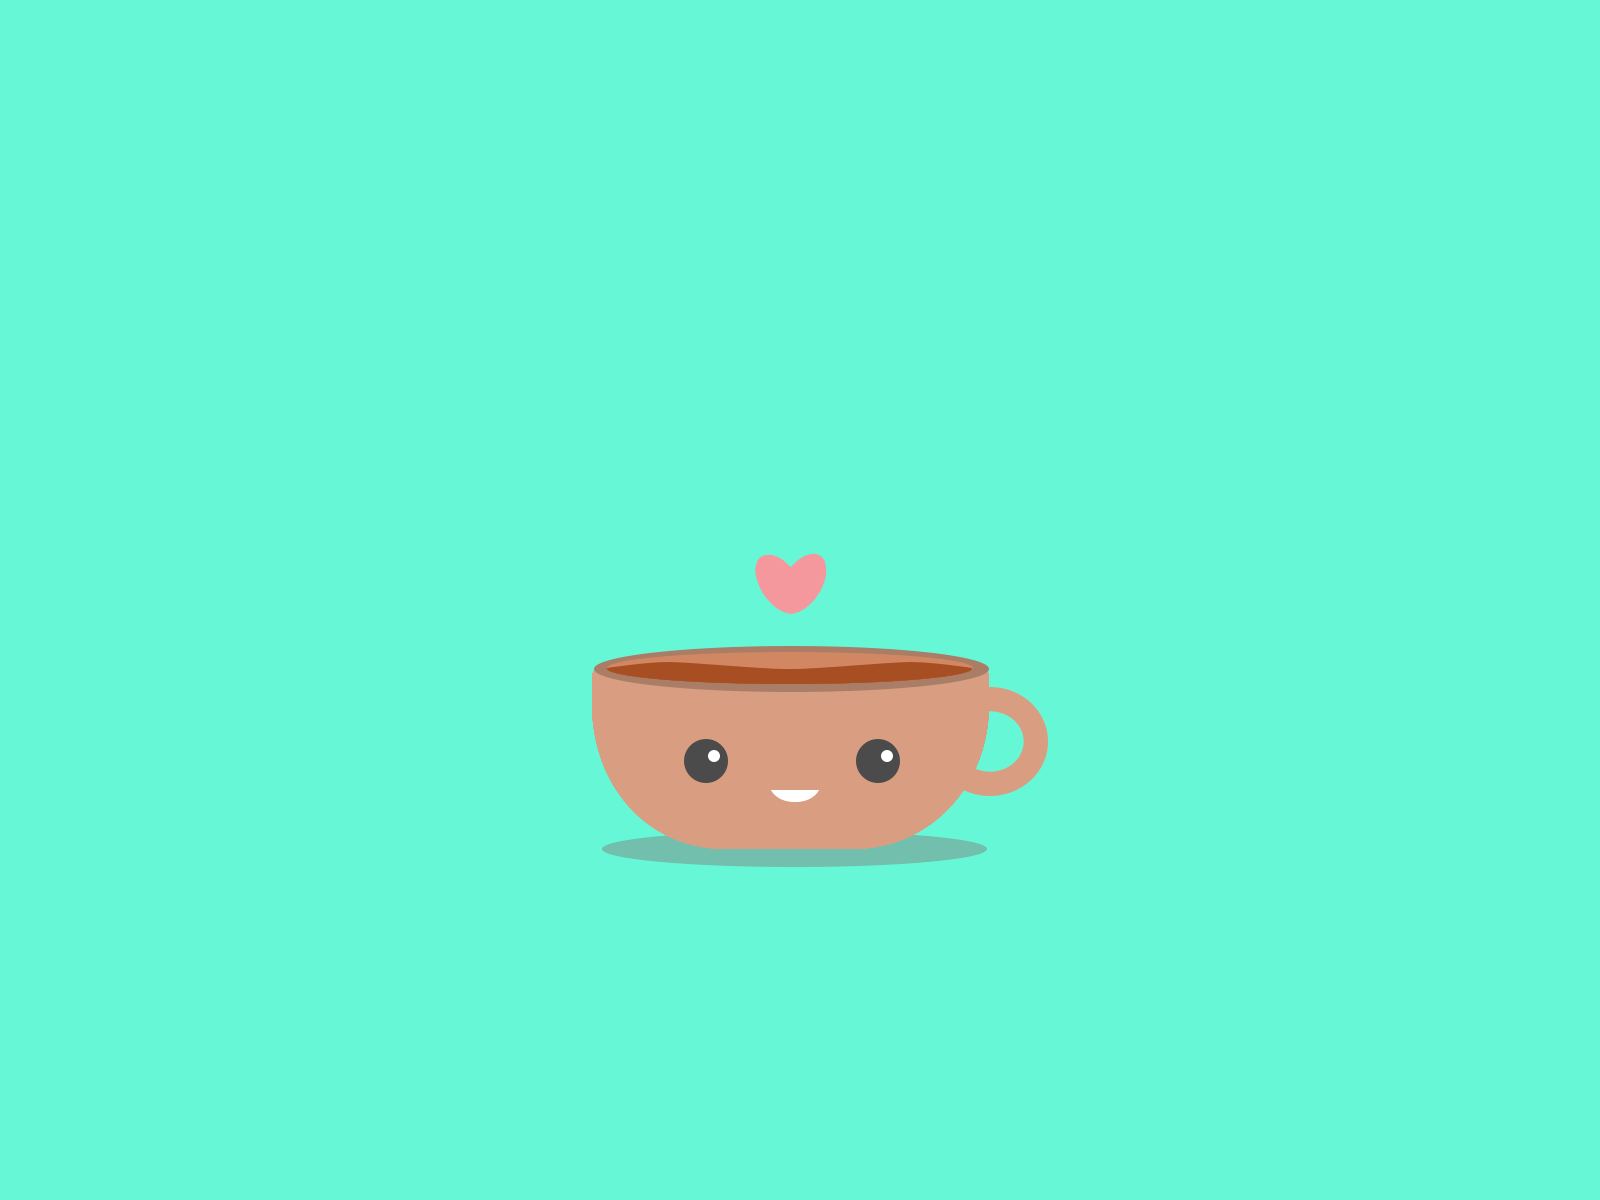 Day 1 - Coffee love by Kimberly M. Brouillette on Dribbble